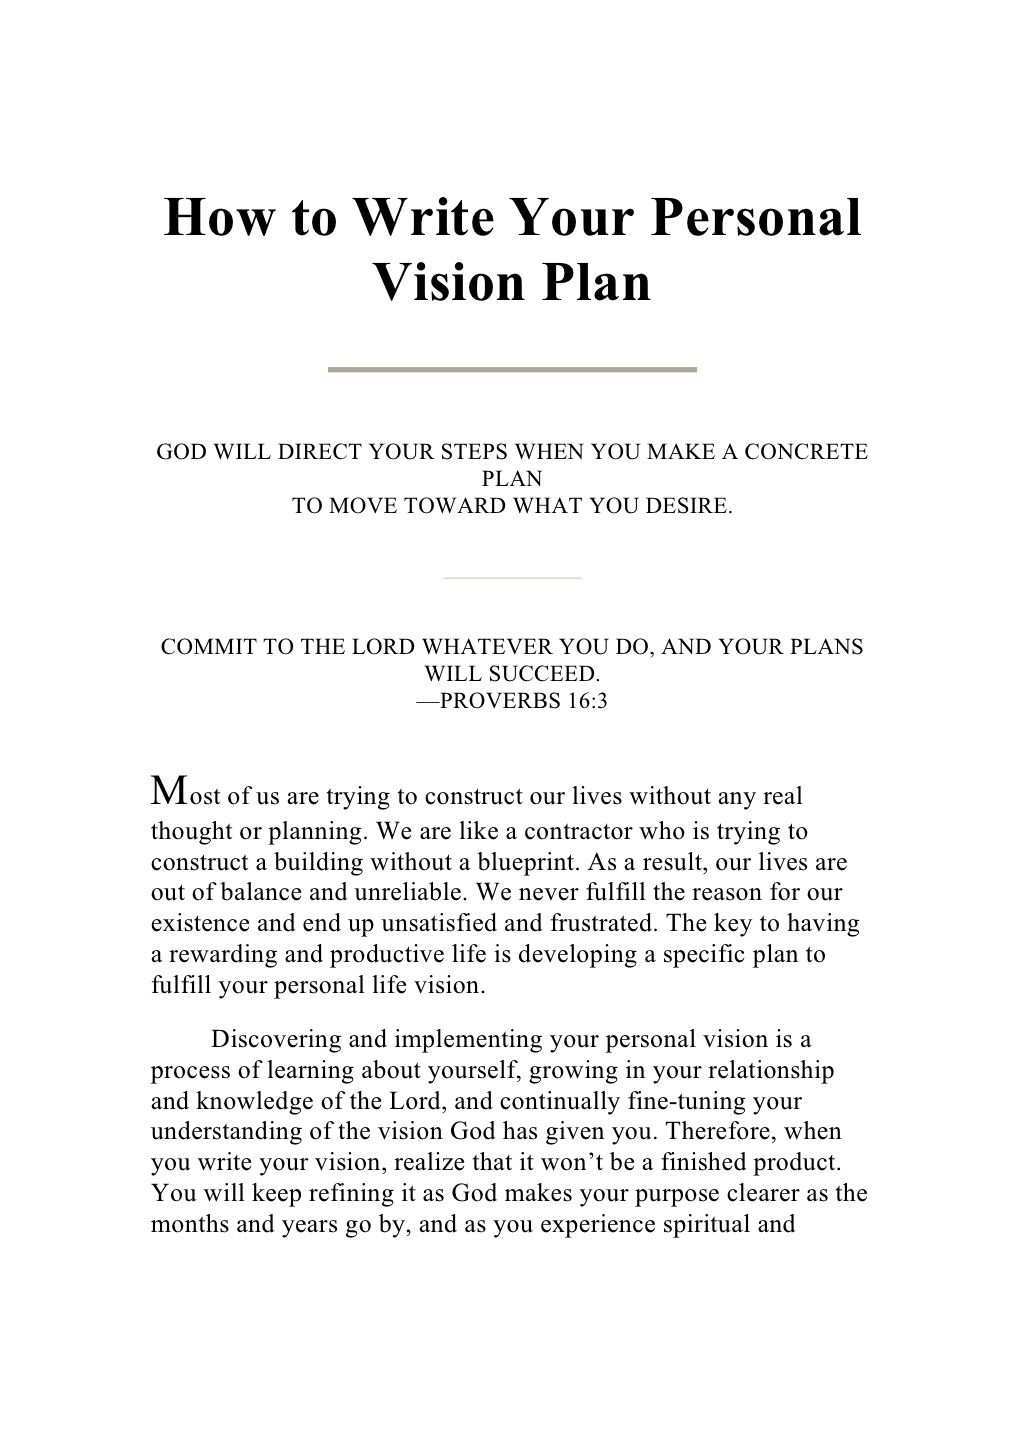 Writing Your Personal Vision Plan Vision Statement Examples Personal Mission Statement Examples Mission Statement Examples